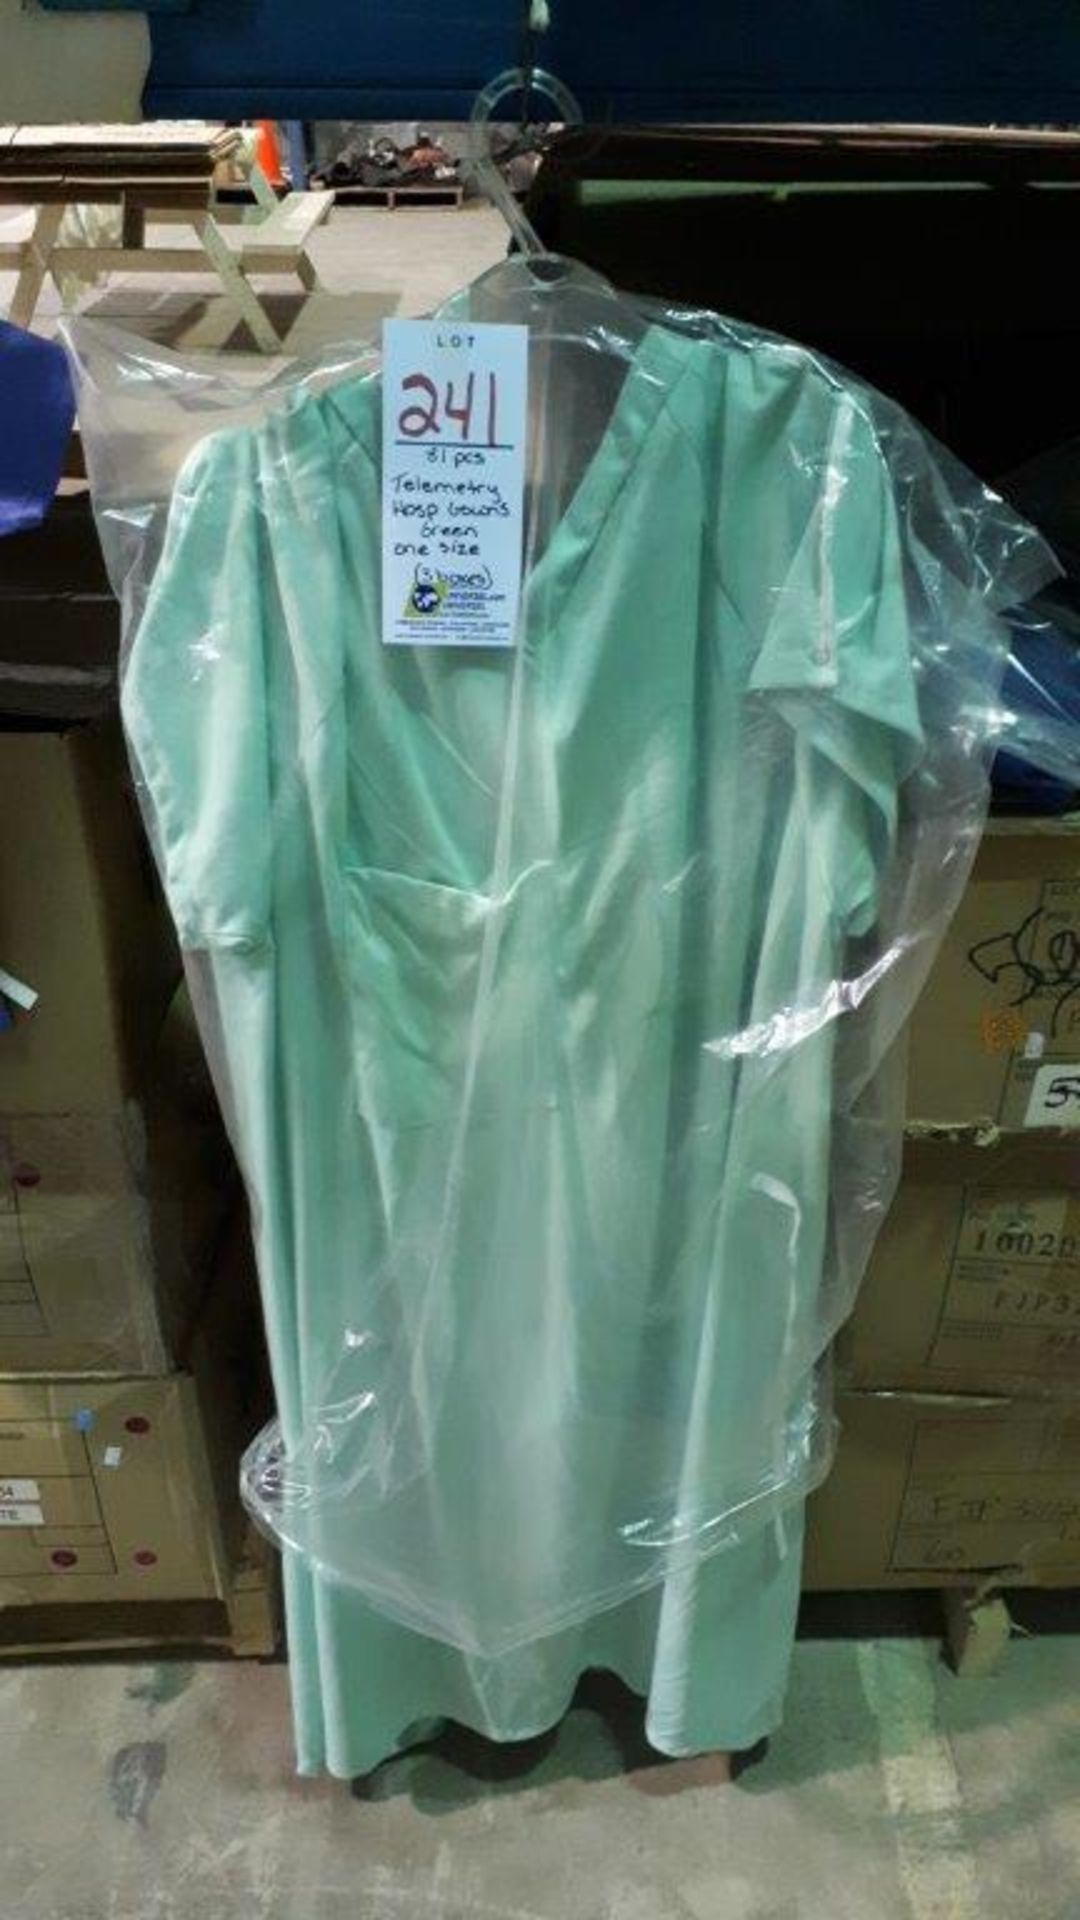 Telemery hospital gowns,green,one size (3 boxes)